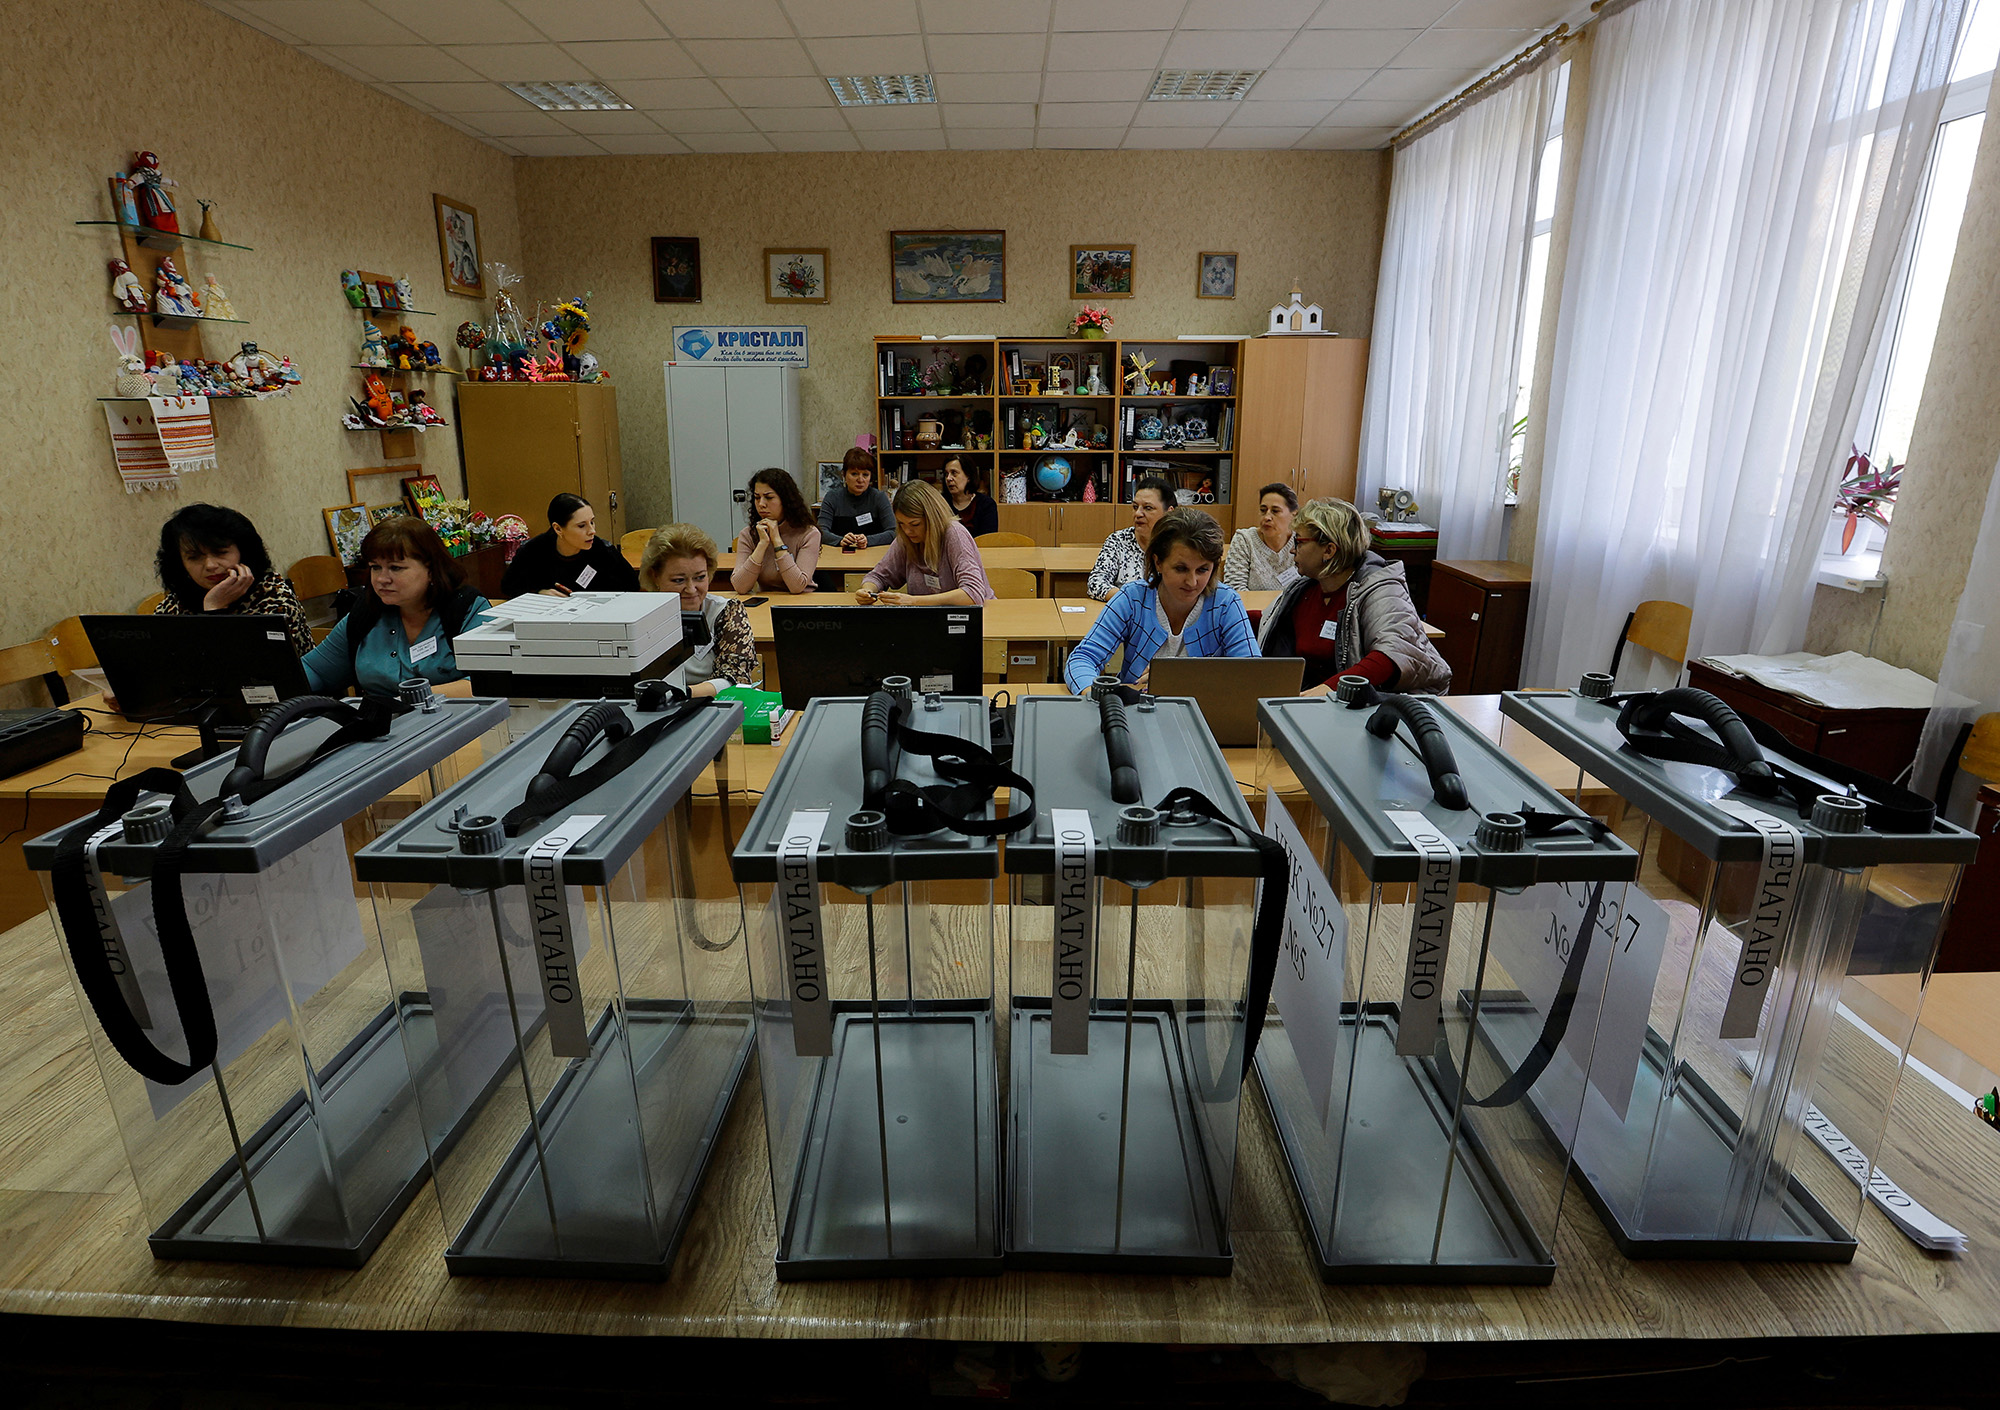 Members of the local electoral commission gather at a polling station ahead of the planned referendum on the joining of the self-proclaimed Donetsk people's republic to Russia, in Donetsk, Ukraine, on September 22.